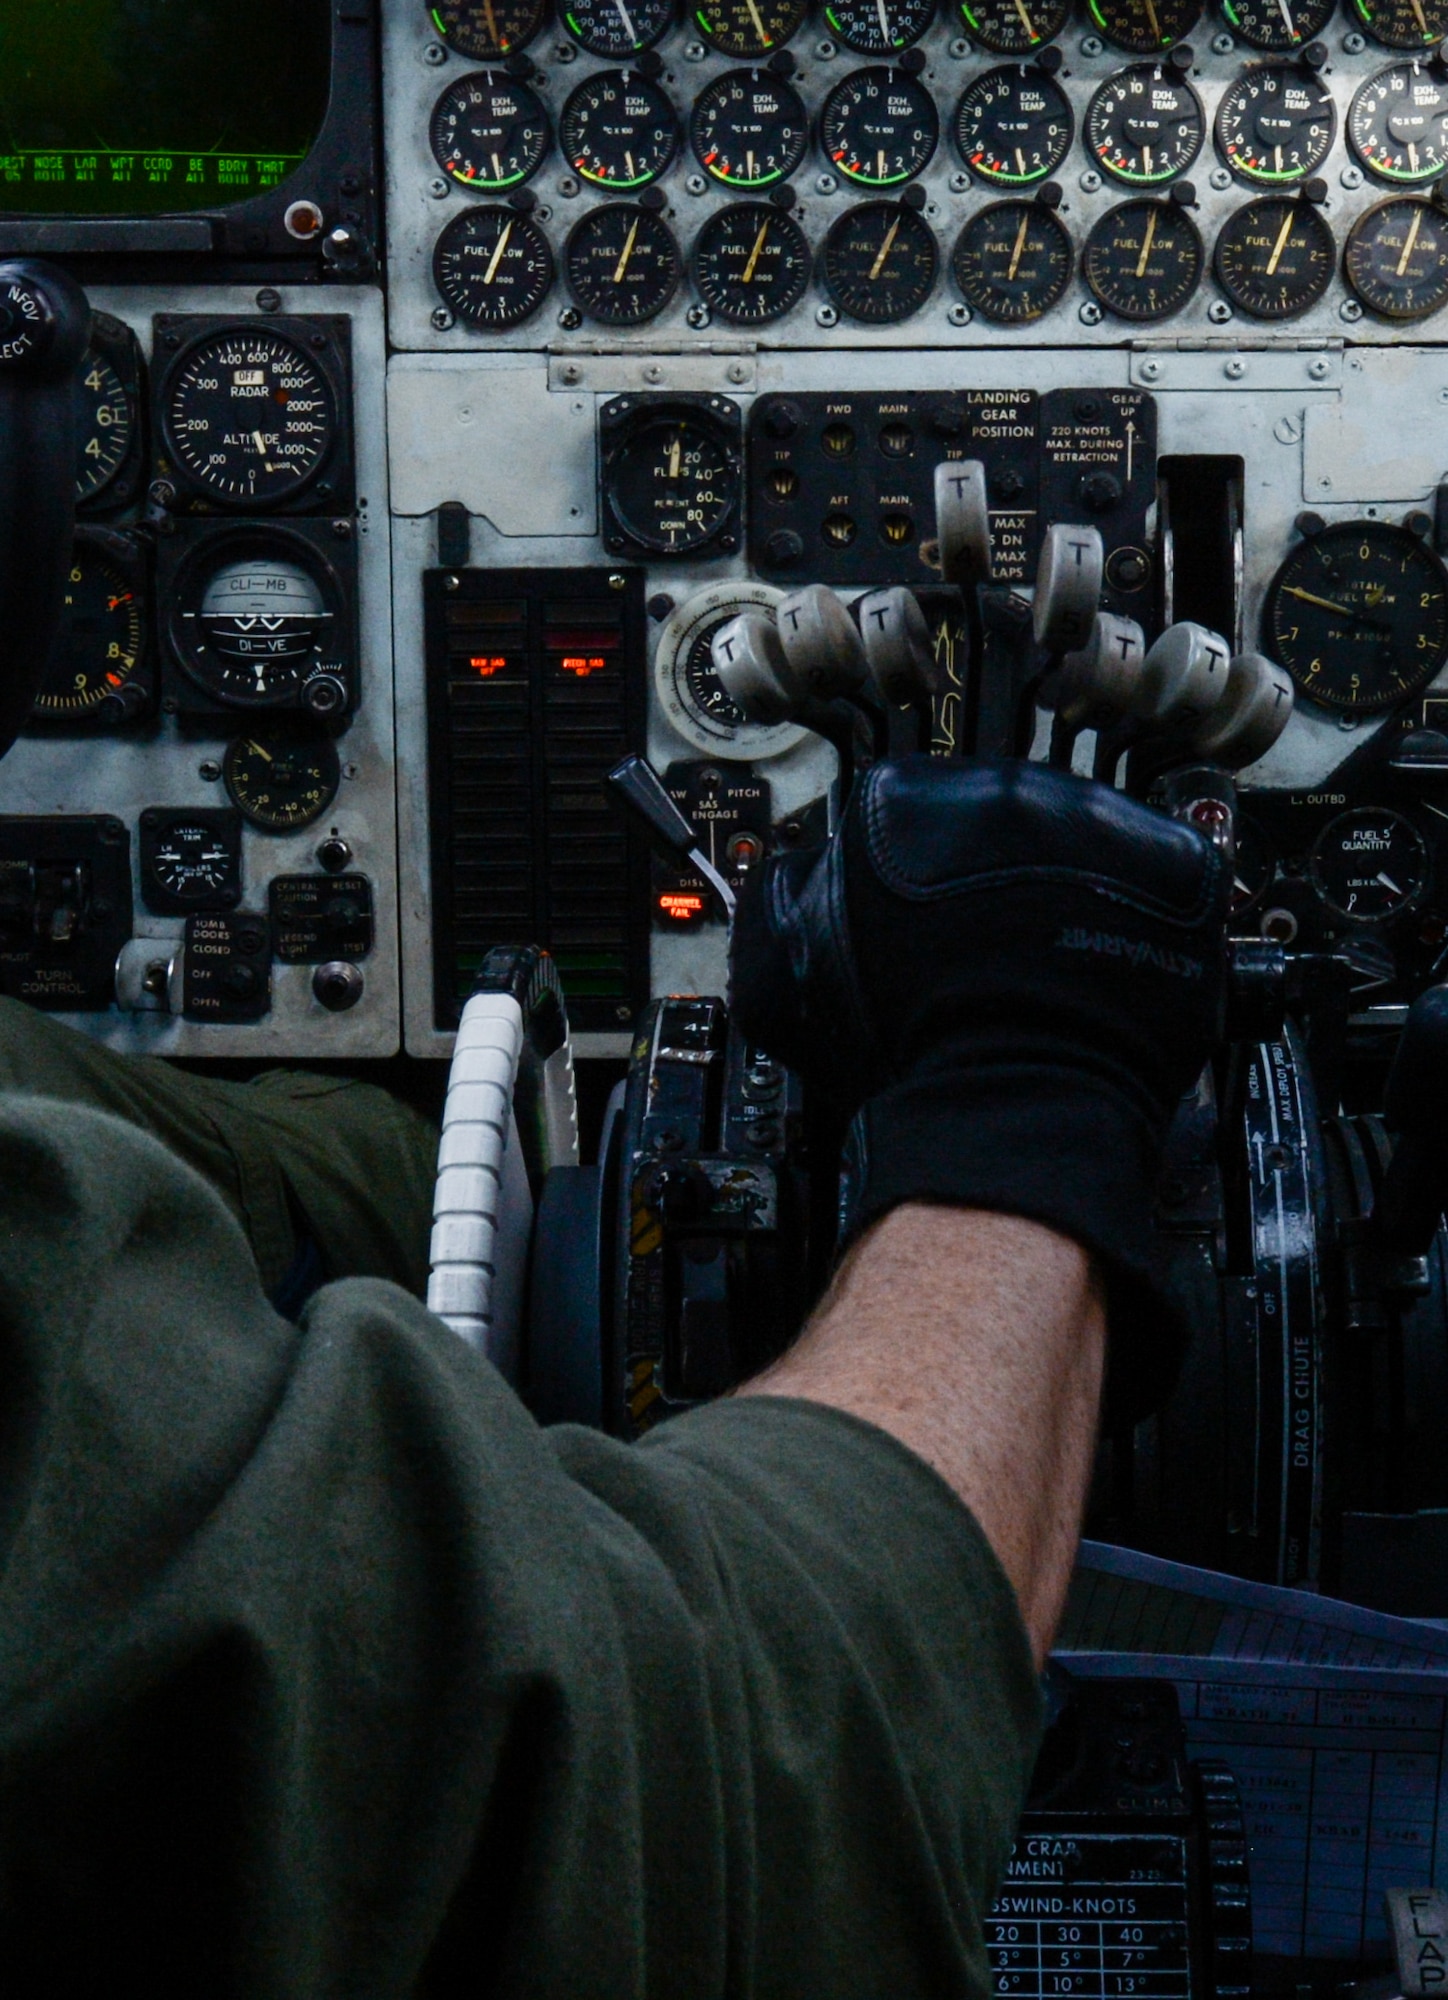 Capt. Lance Adsit, 20th Bomb Squadron aircraft commander, presses forward on the throttles of a B-52 Stratofortress during an integration flight above the Gulf of Mexico Oct. 13, 2016. The integration was the capstone event of a six-month training course, involving extensive communication planning across more than 10 agencies within the bomber community, followed by a live-fly exercise with two B-1 Lancers from Dyess Air Force Base, Texas, and two B-52s from Barksdale. U.S. Air Force photo/Senior Airman Curt Beach)